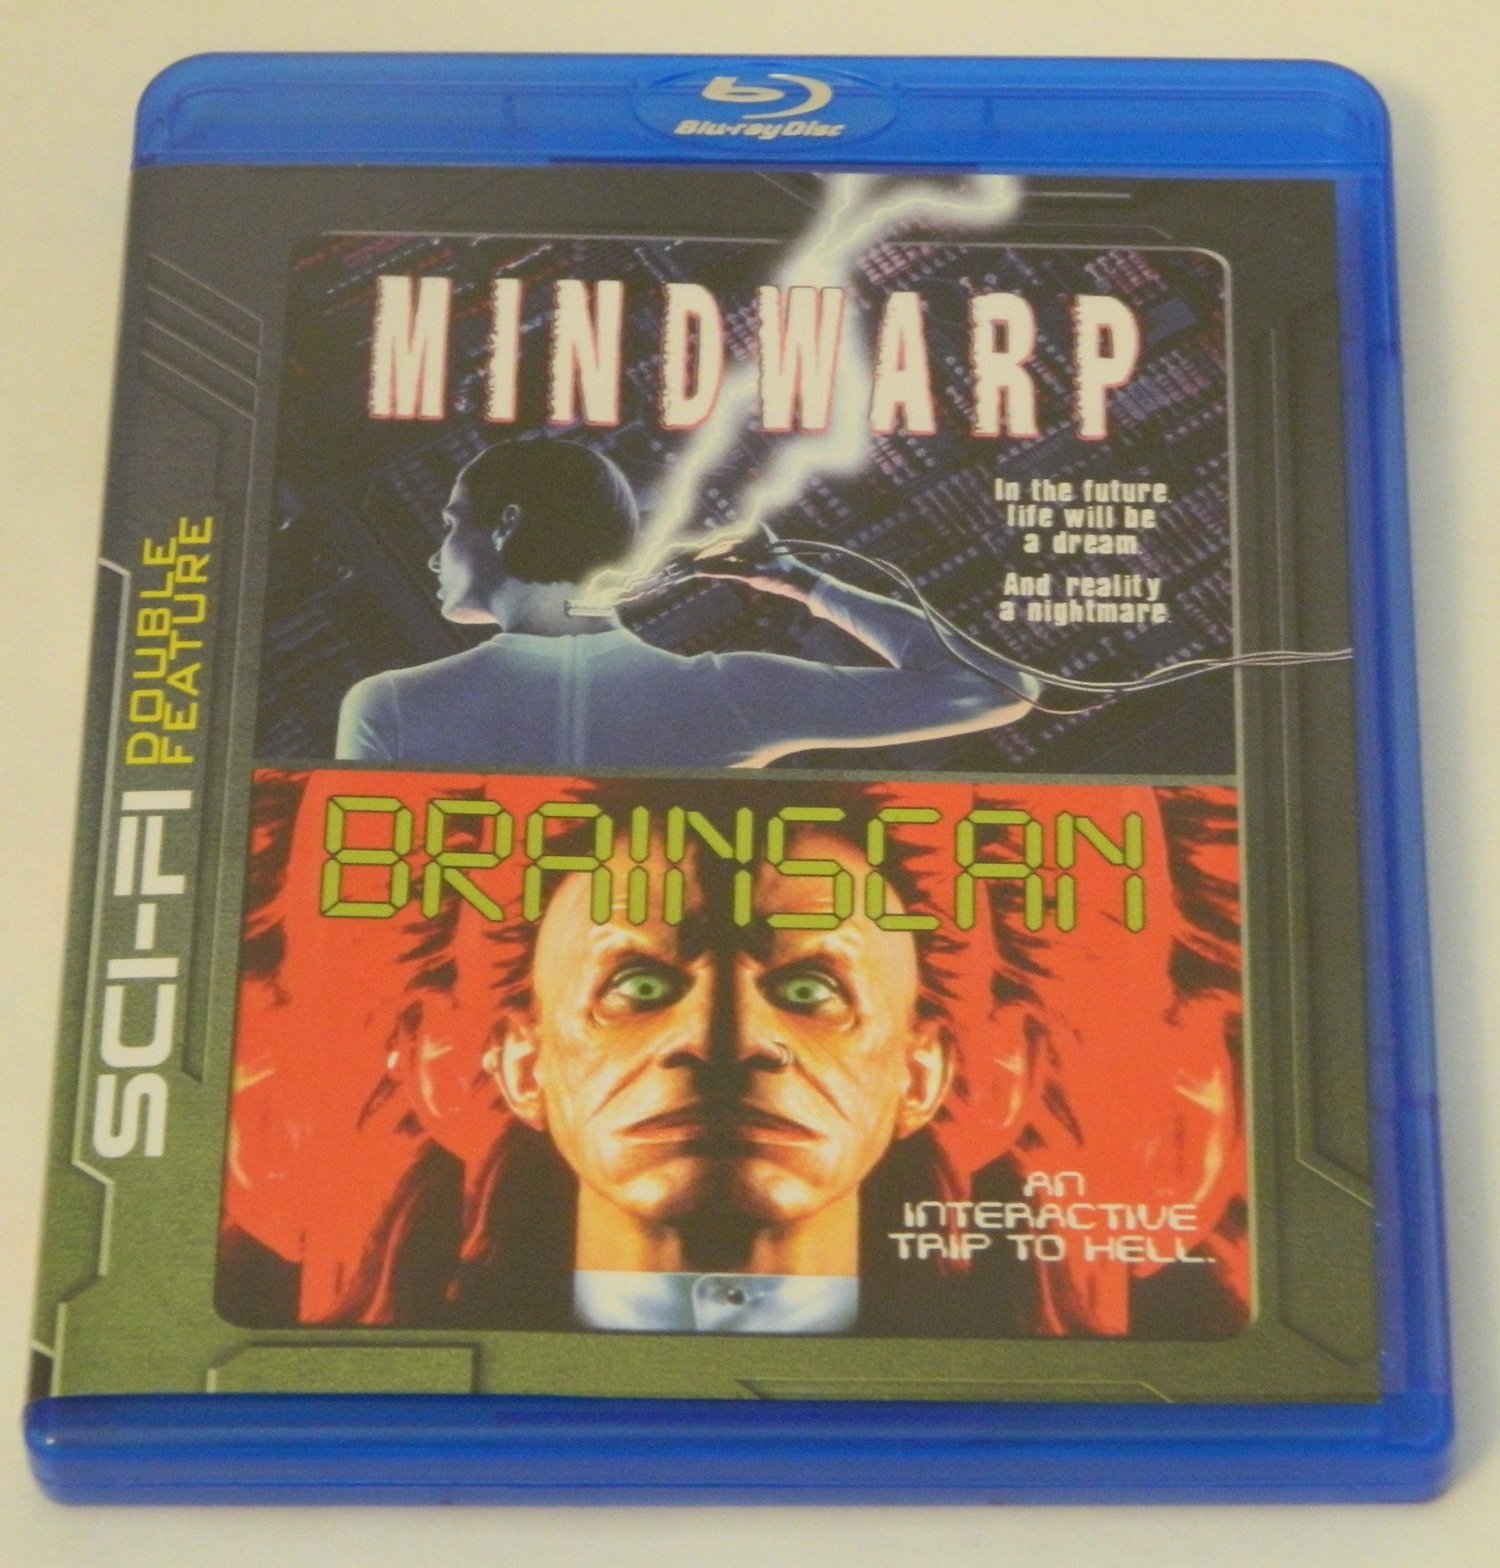 Mindwarp and Brainscan Double Feature Blu-ray